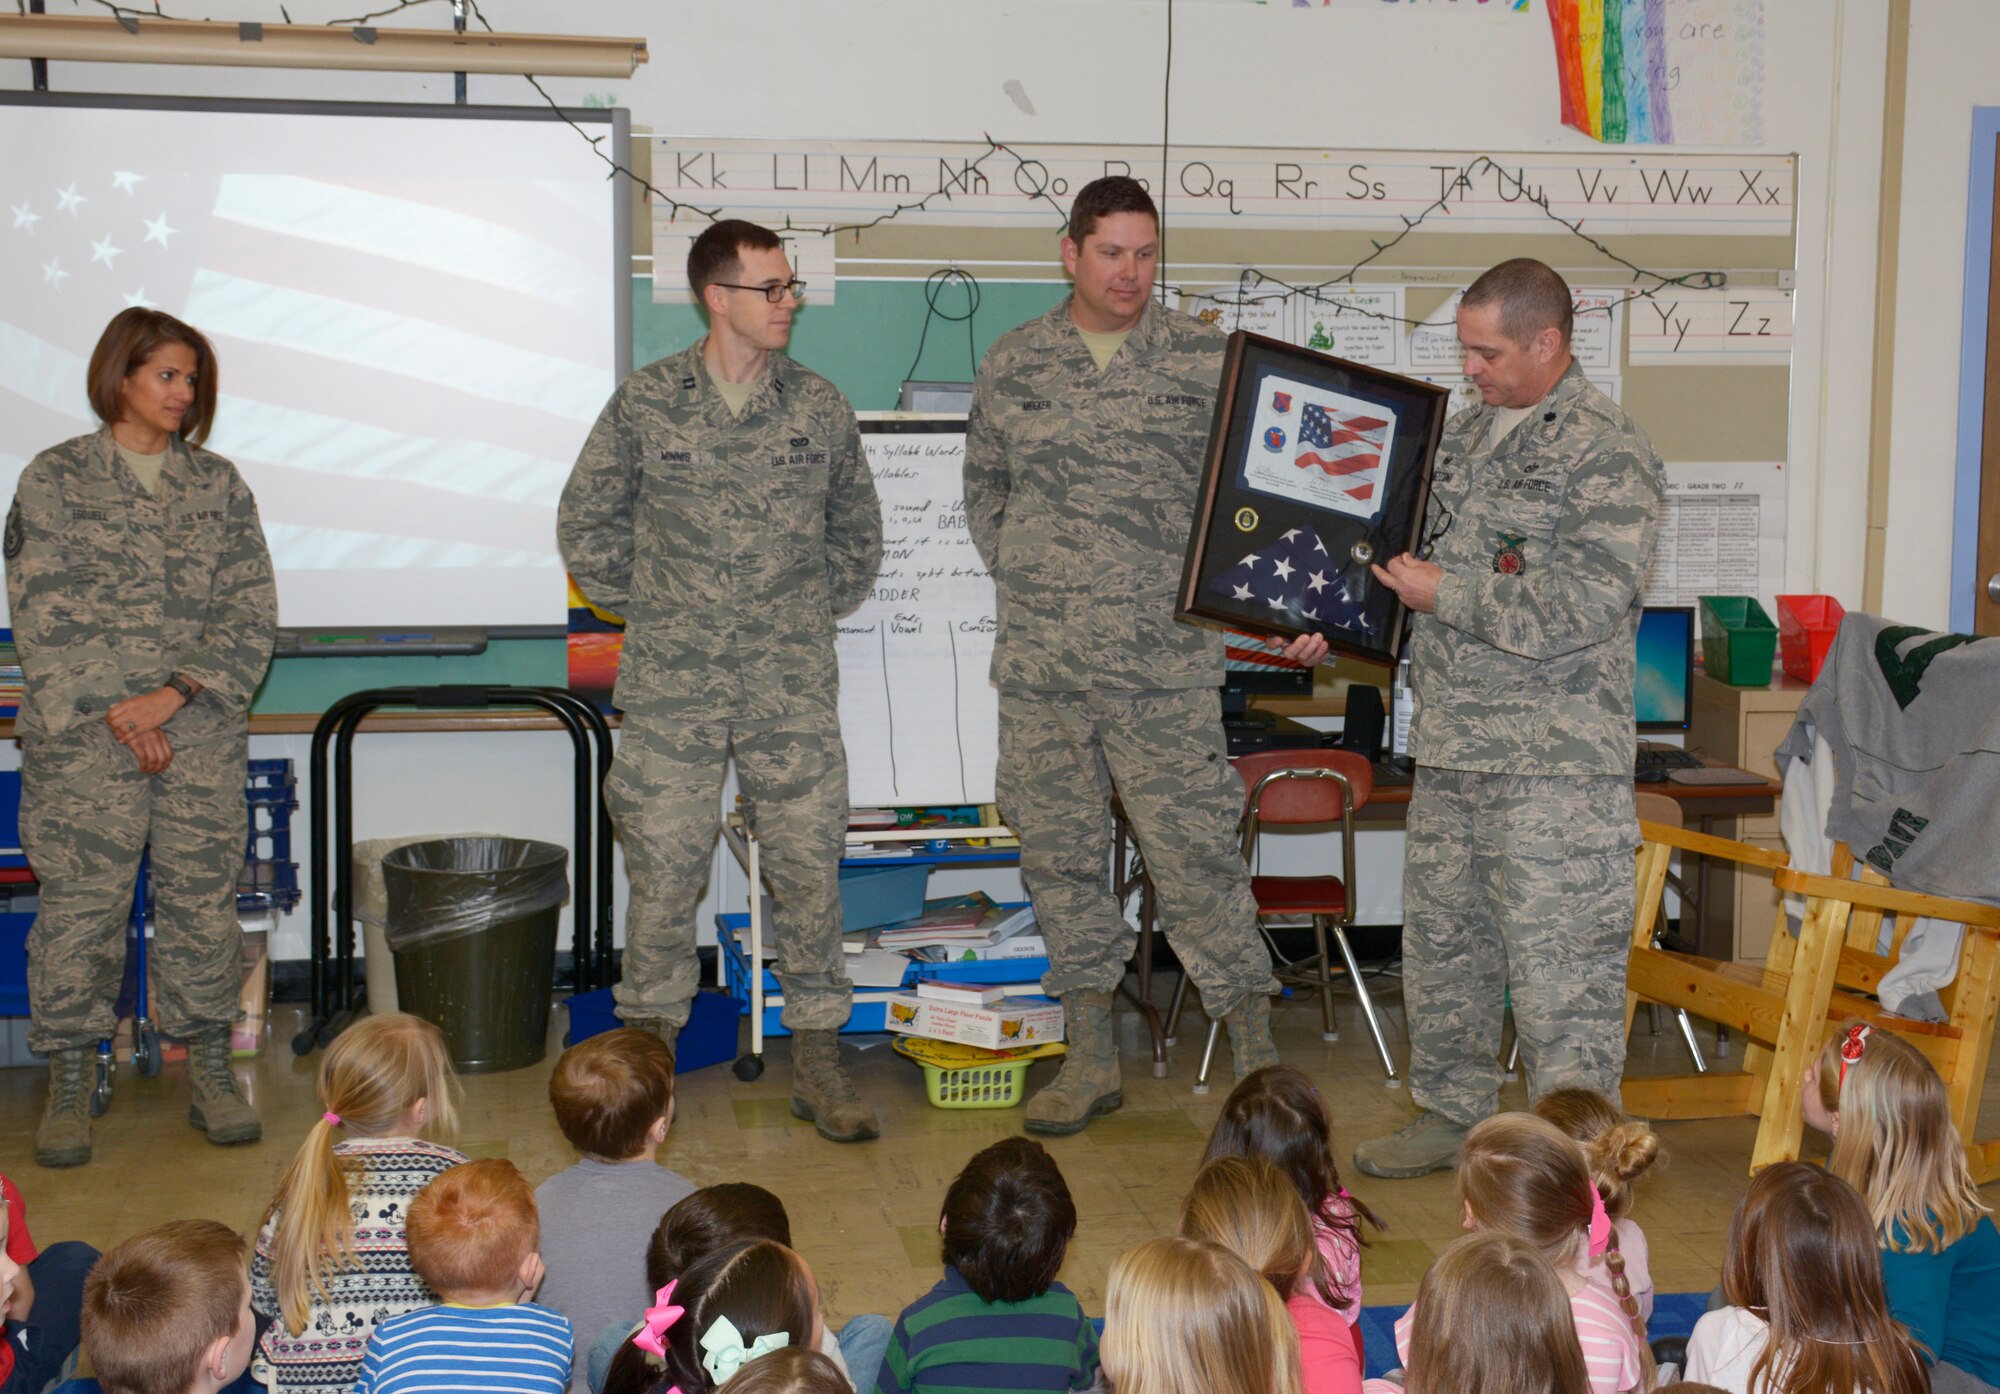 Lt. Col. Eugene R. Mozzoni, 157th Civil Engineer Squadron commander, thanks students at the Garrison Elementary School in Dover, N.H. March 30, 2018. Mozoni presented a flag and certificate to the students during a ceremony thanking the students for sending letters to the engineers while they were deployed to the Middle East. The flag was flown over the country of Kuwait during the last holiday season. (N.H. Air National Guard photo by Master Sgt. Thomas Johnson)